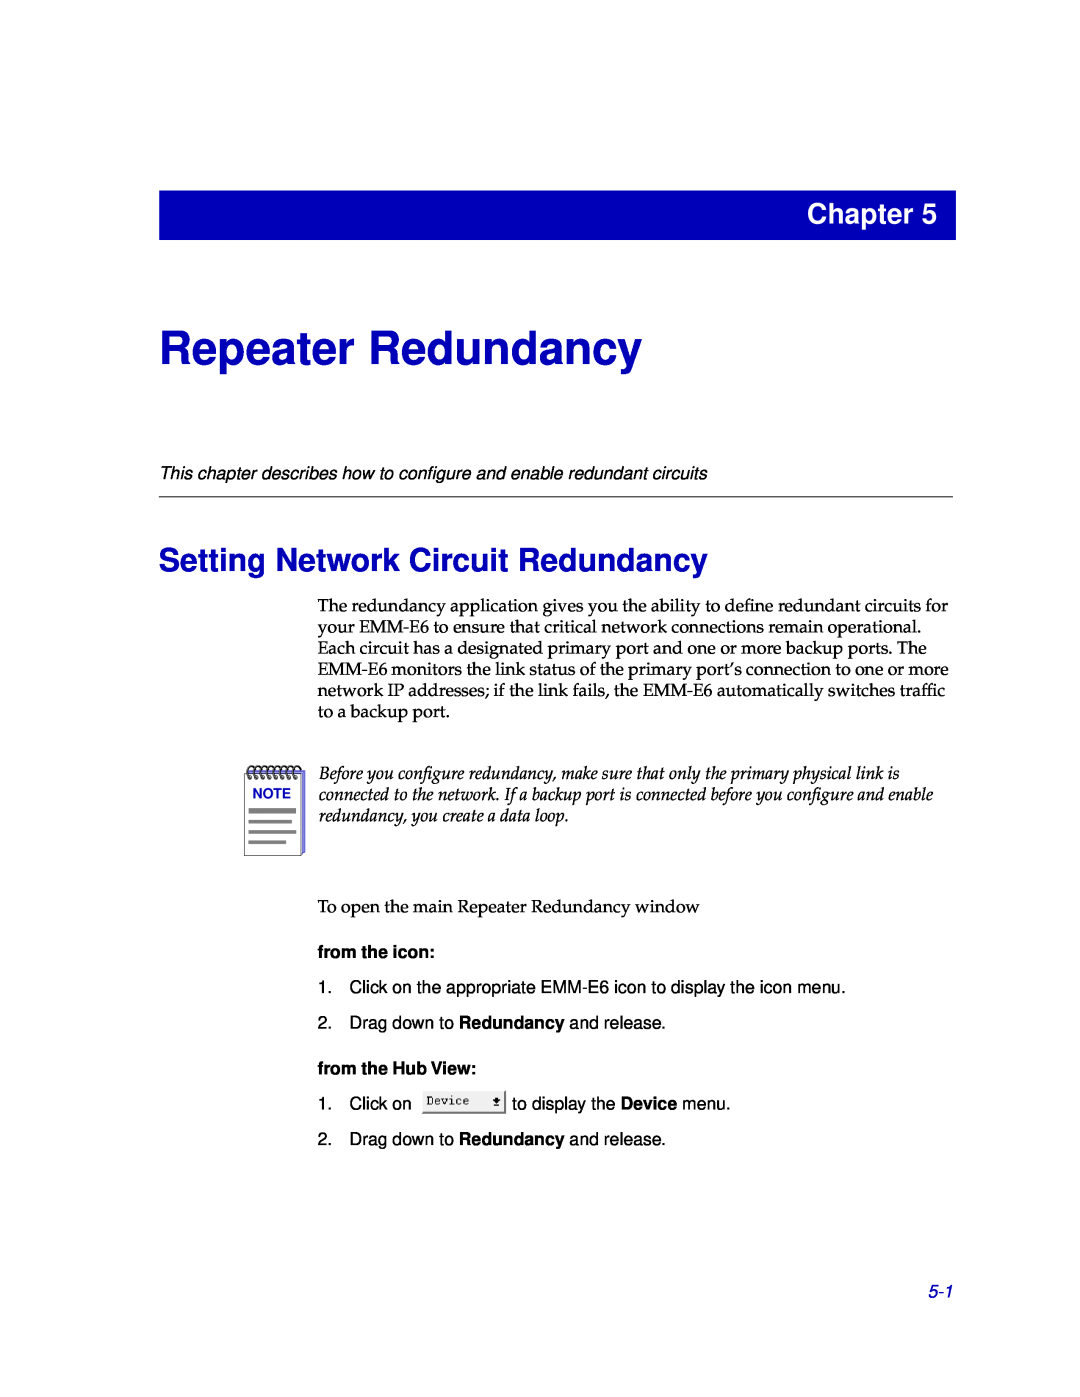 Cabletron Systems EMM-E6 manual Repeater Redundancy, Setting Network Circuit Redundancy, Chapter, from the icon 